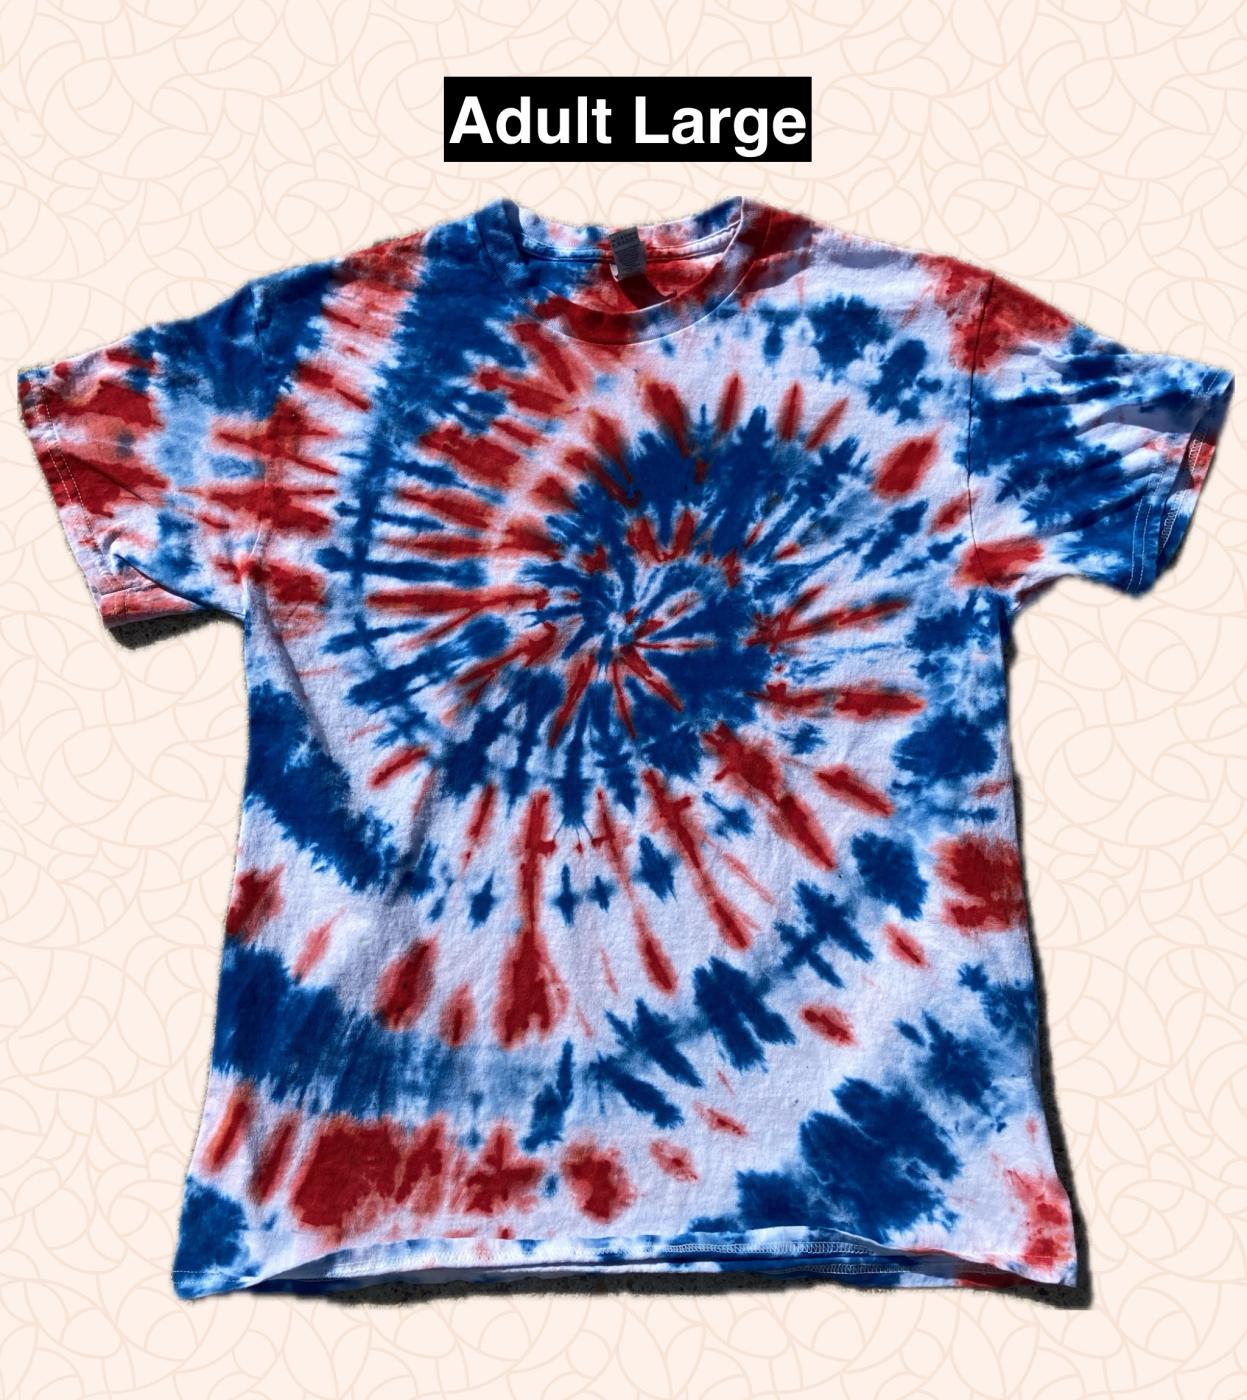 Red White & Blue Spiral Tie Dye T Shirt Adult Large